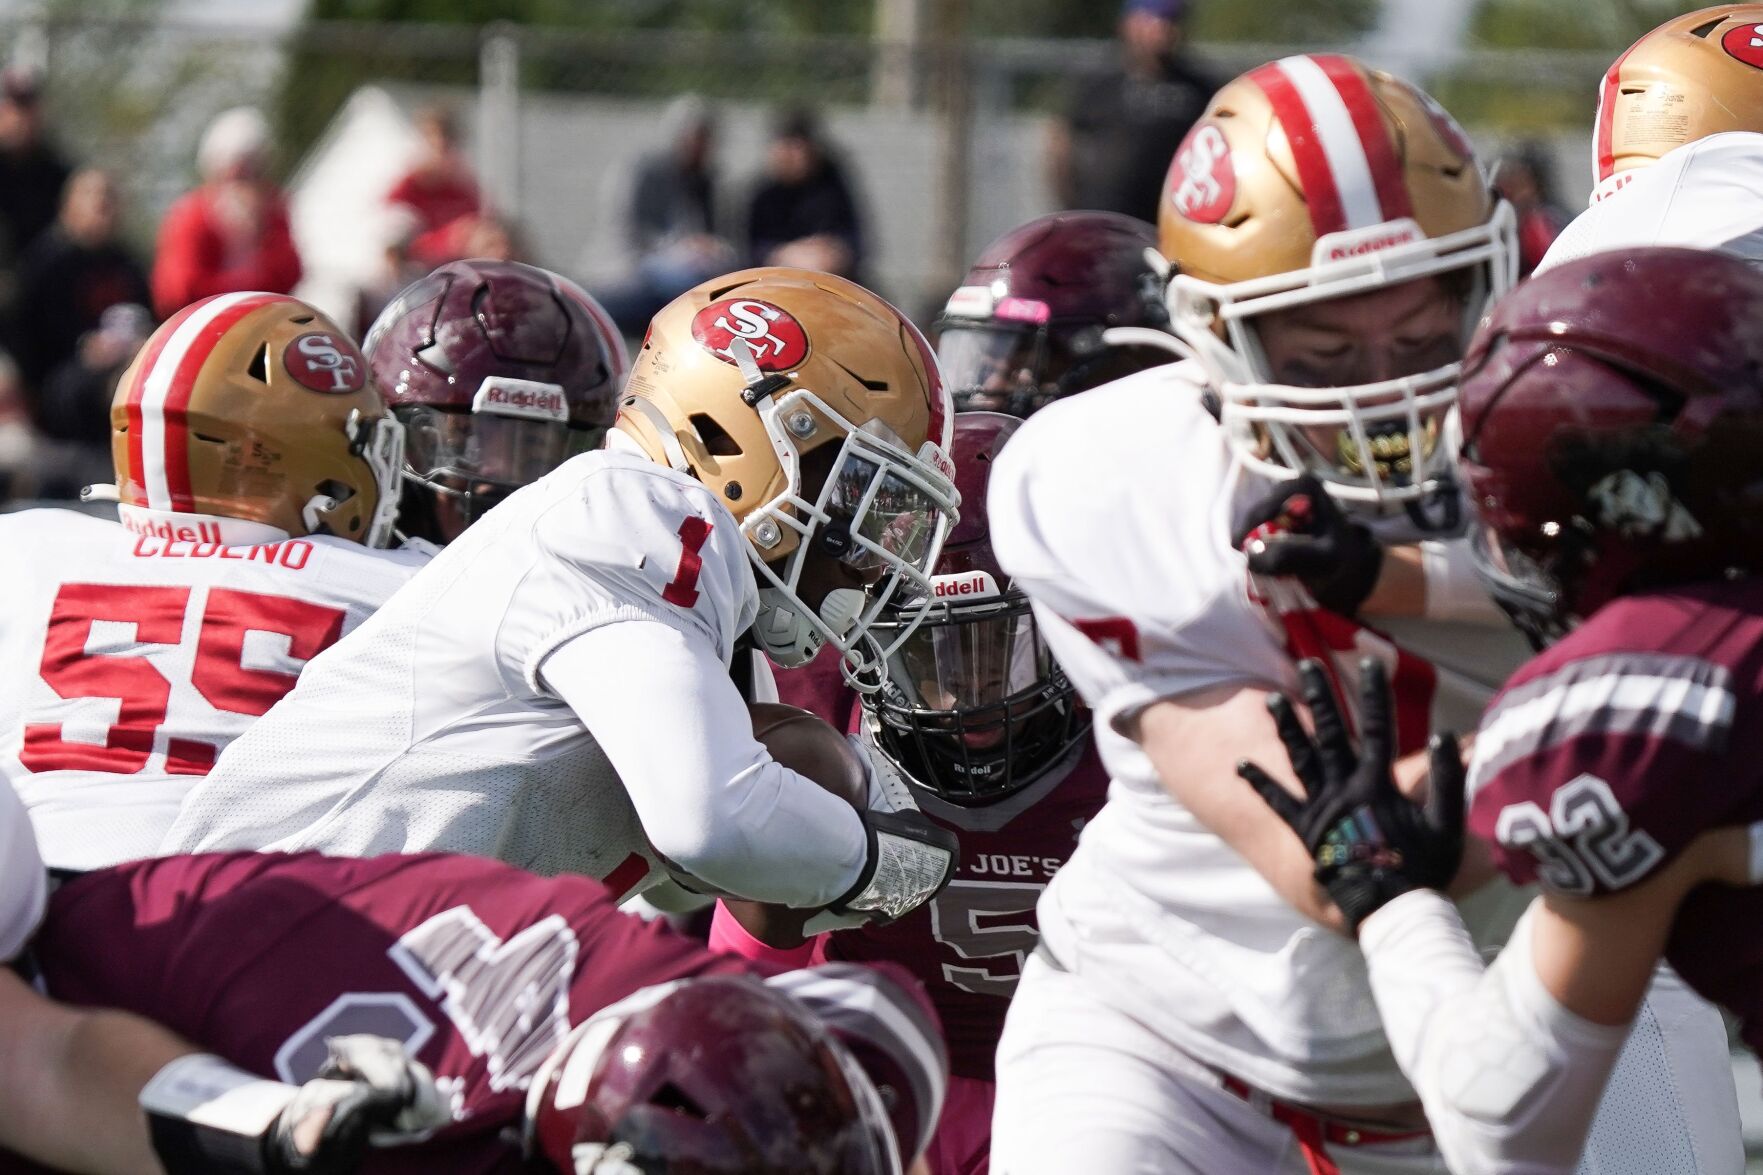 Monsignor Martin A Division football final: Canisius vs. St. Francis